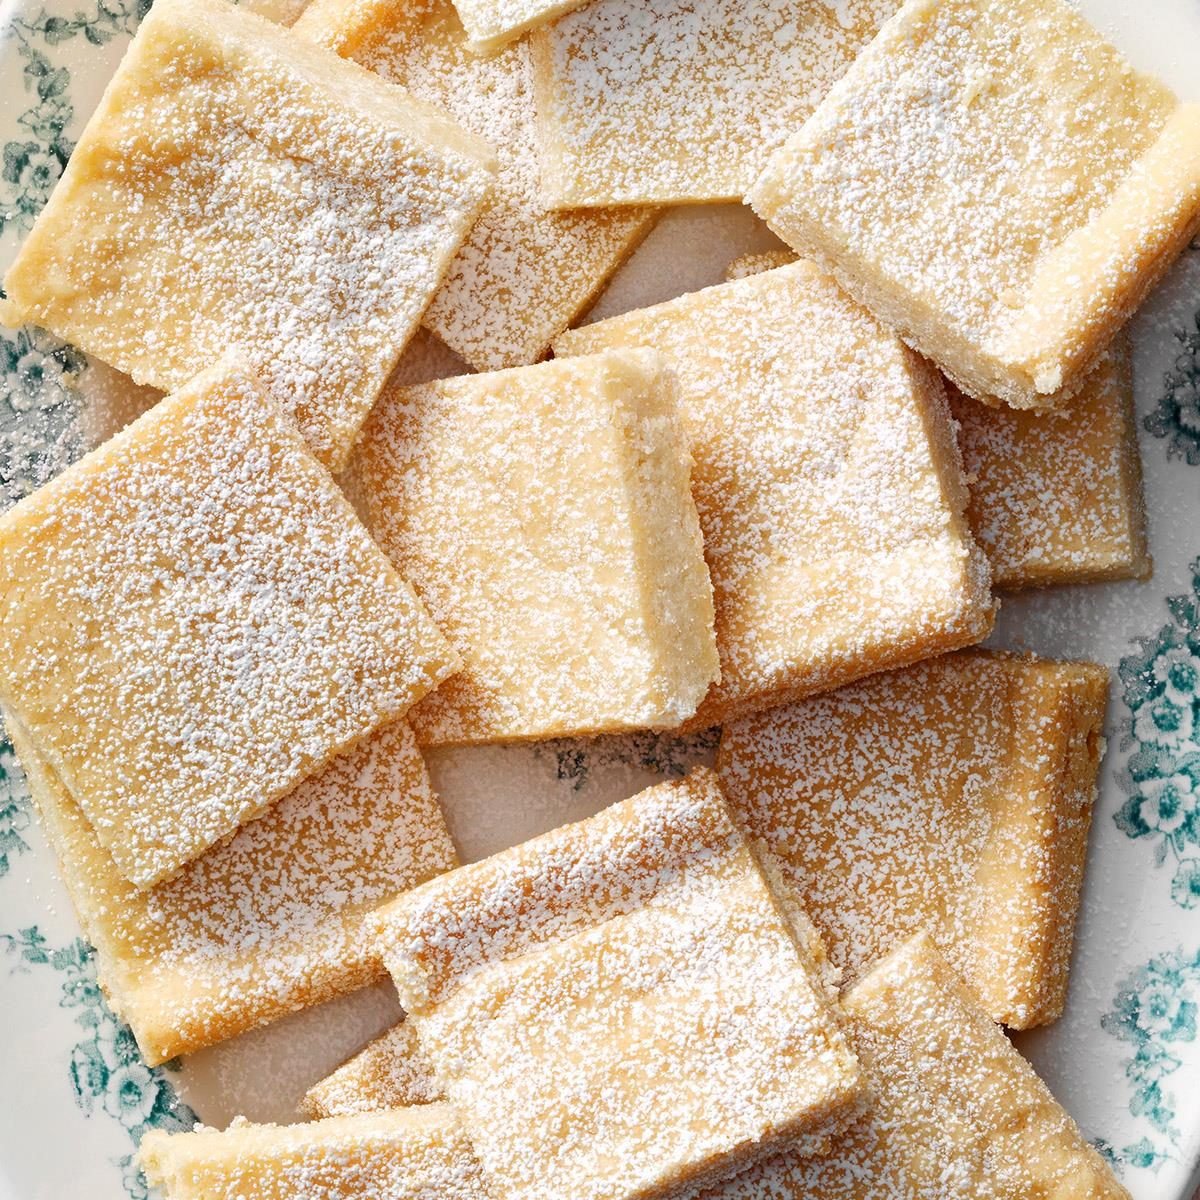 Traditional Scottish Shortbread Only Requires 3 Ingredients